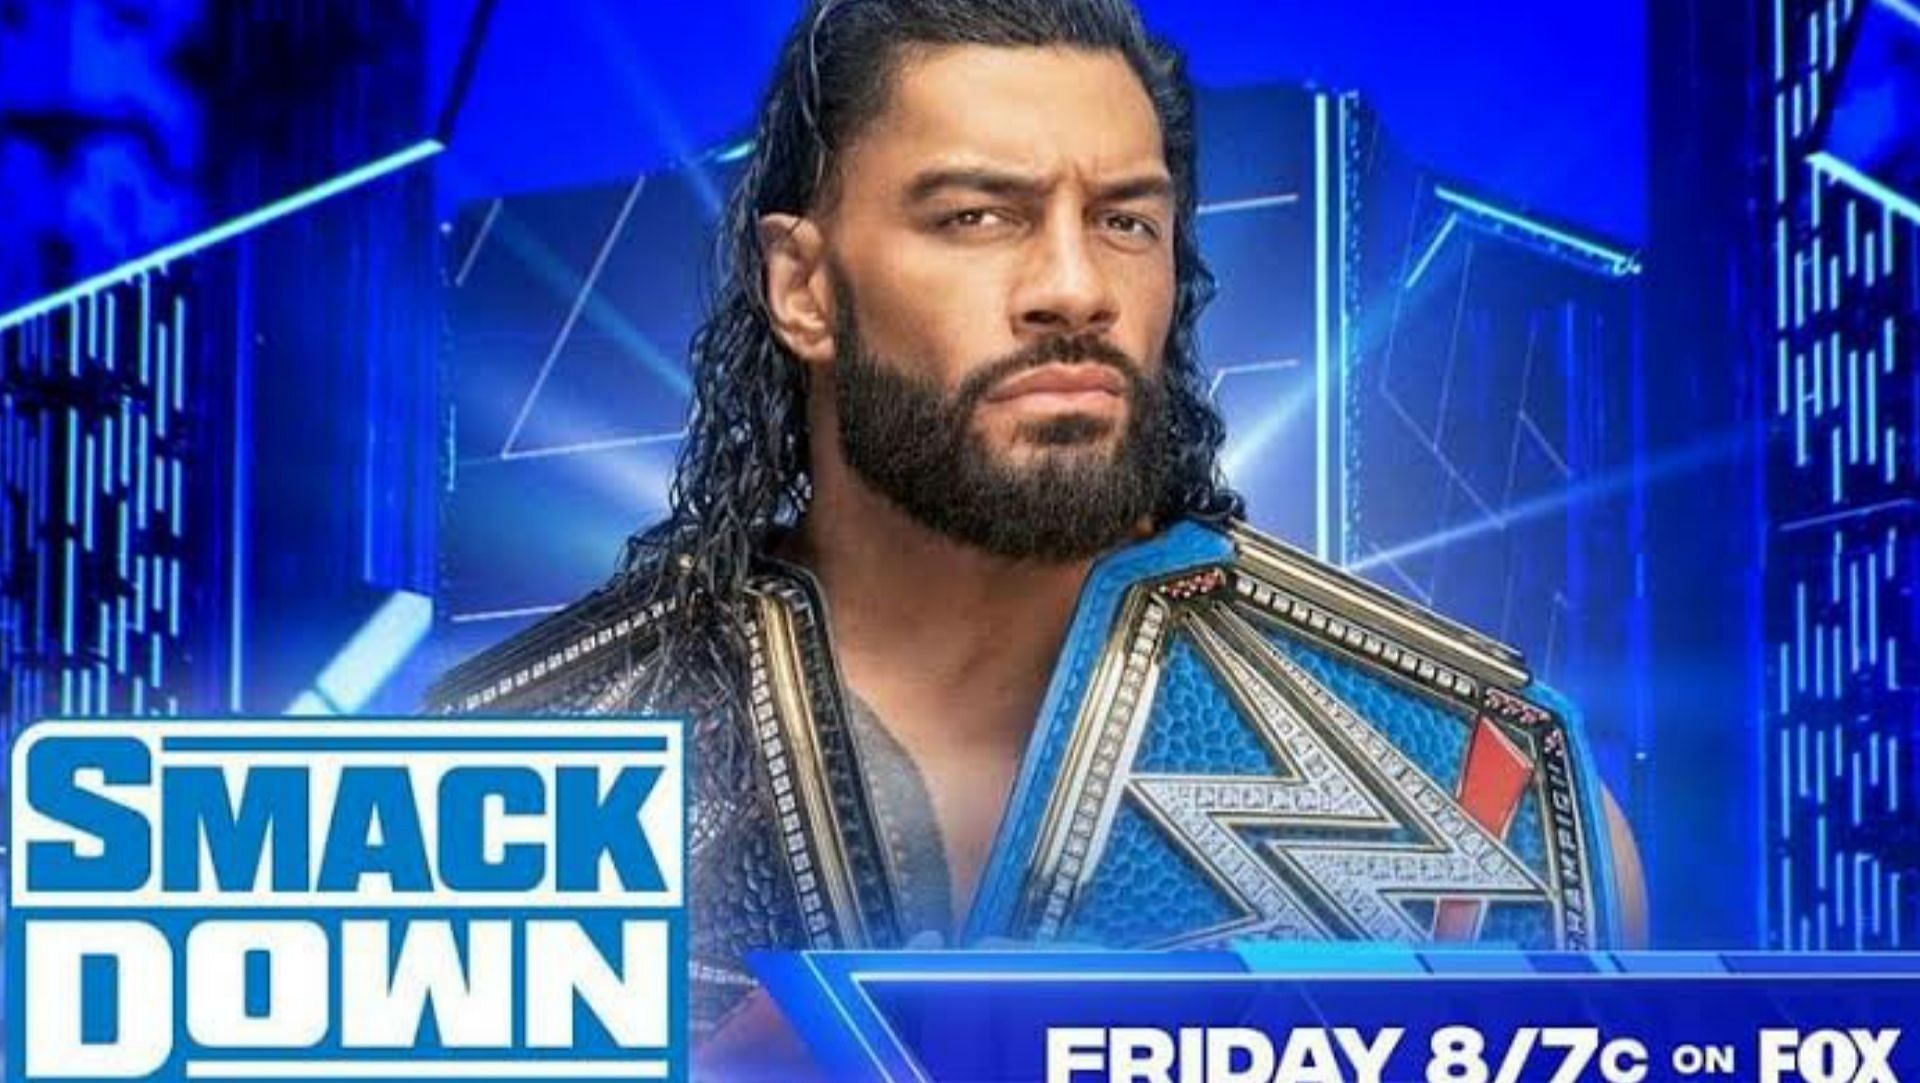 Roman Reigns will celebrate 1000 days as WWE Universal Champion on Friday.